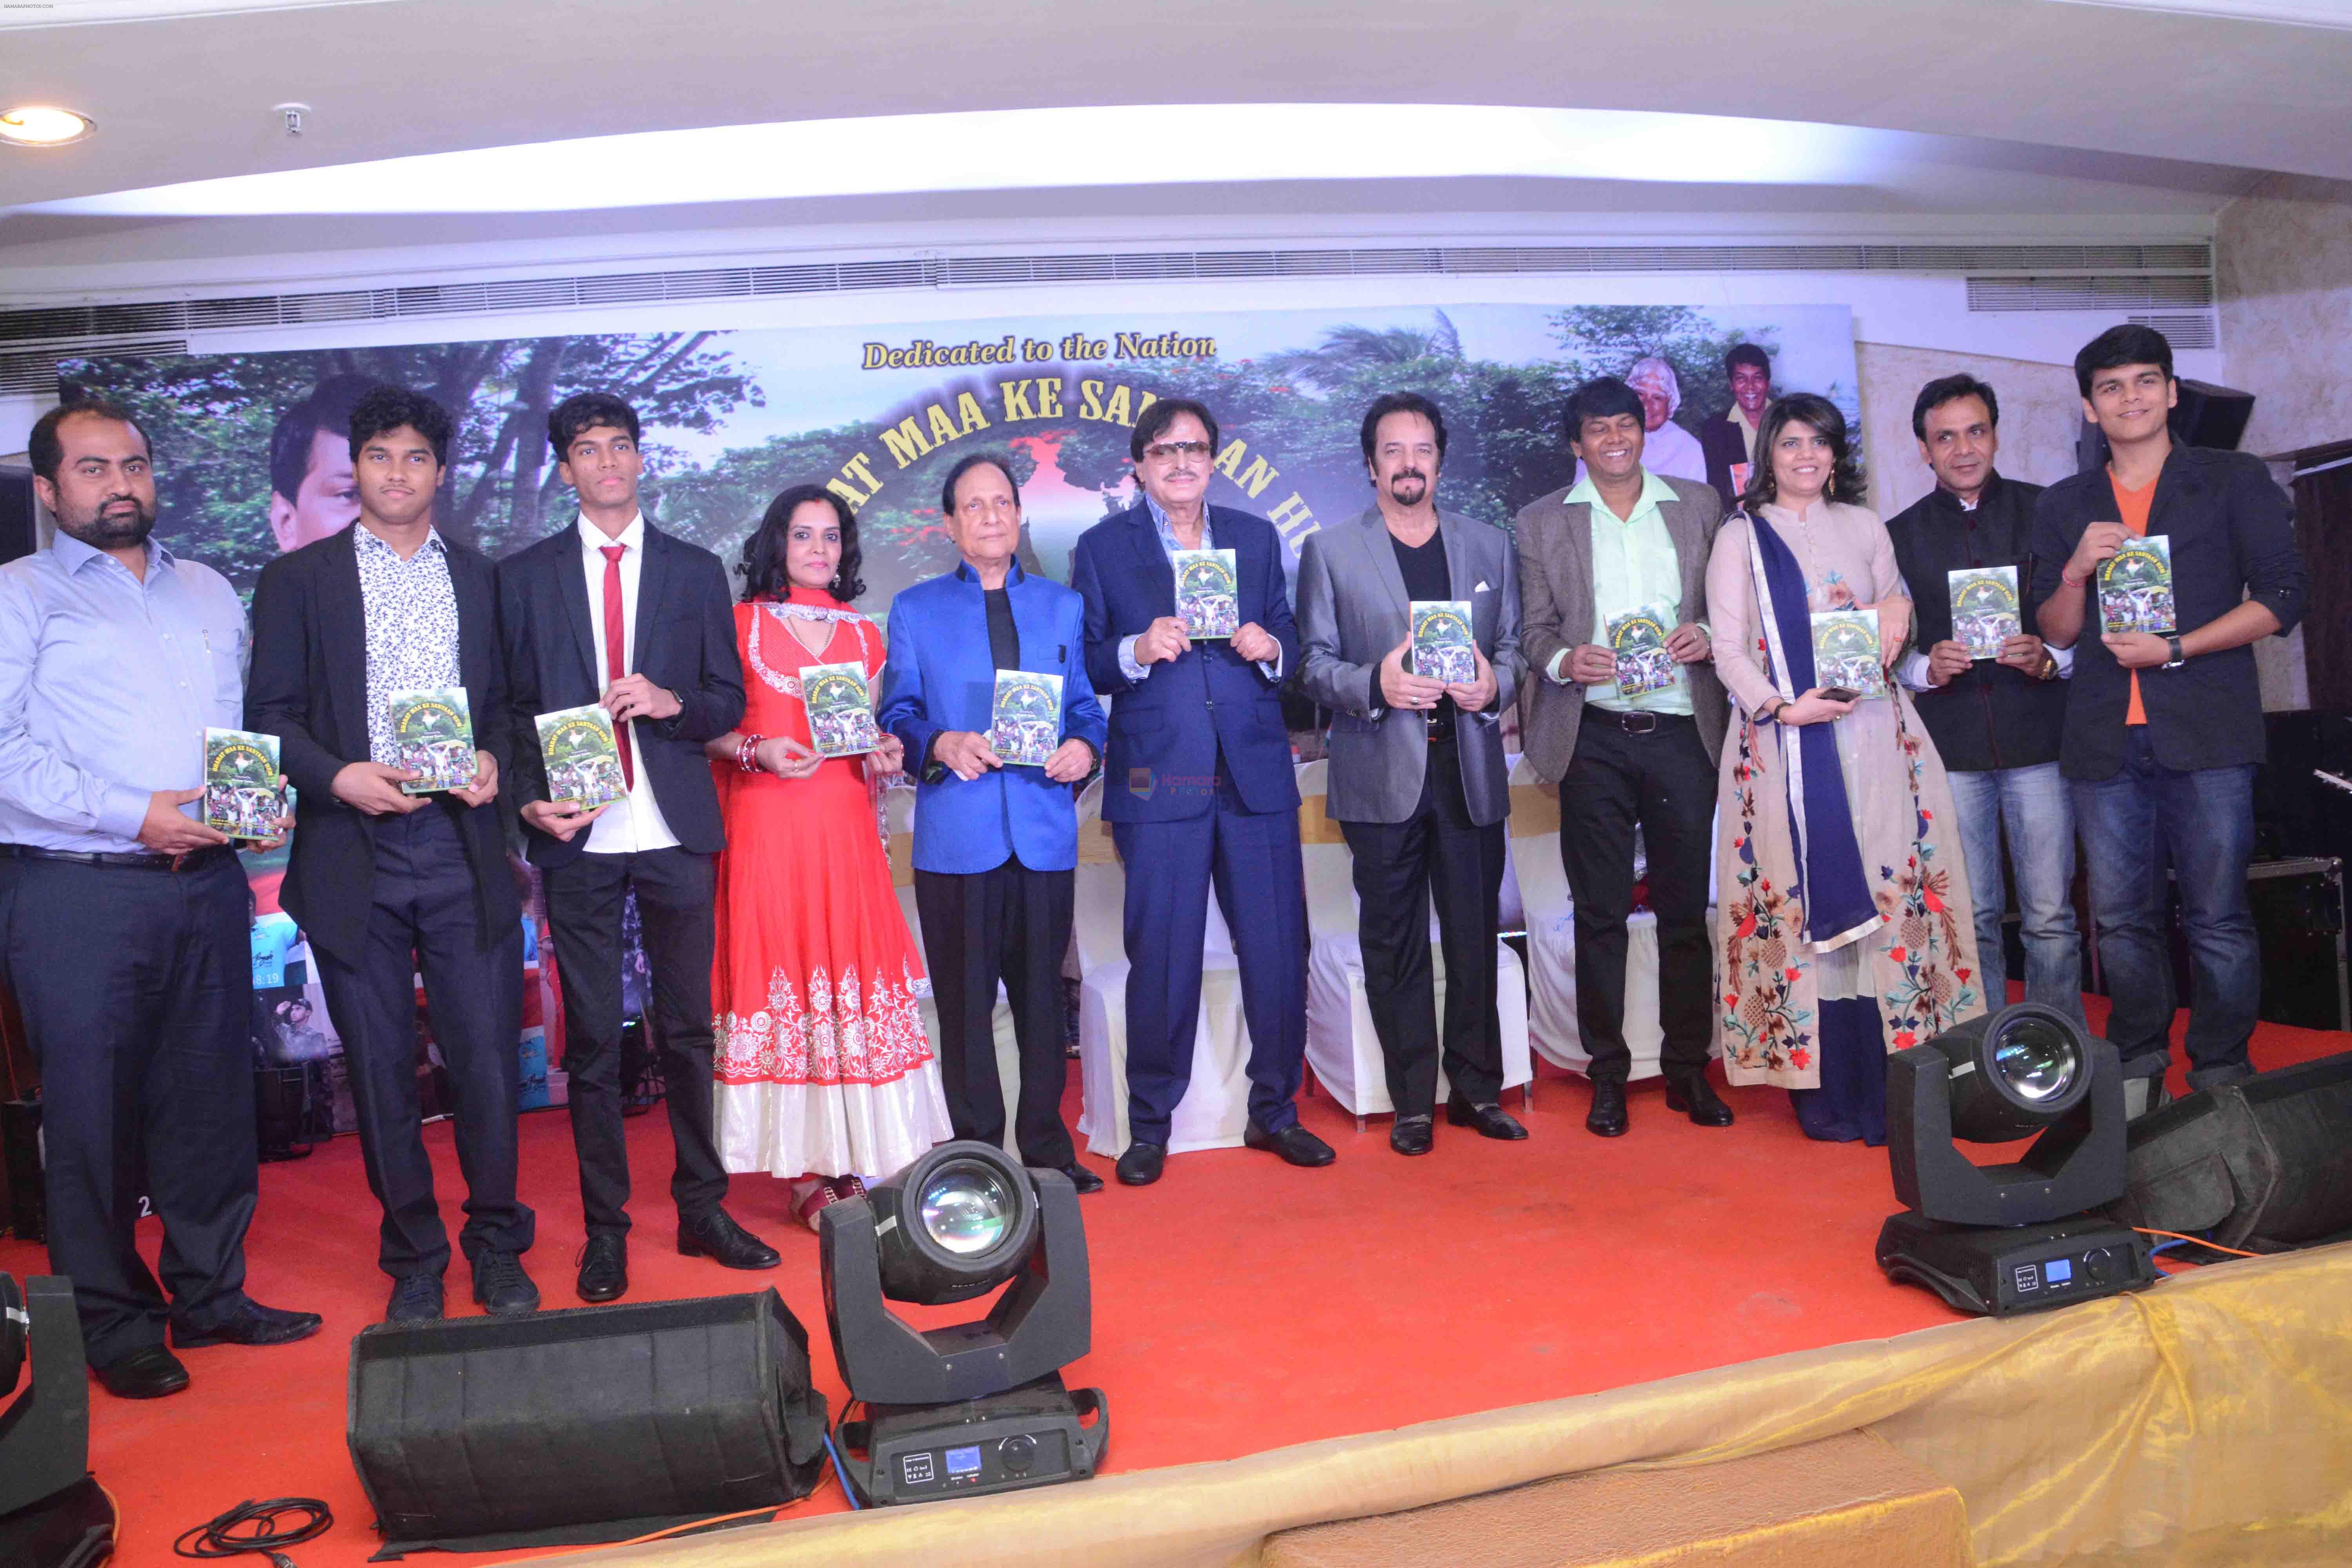 attend Hemant Tantia song launch for Republic Day